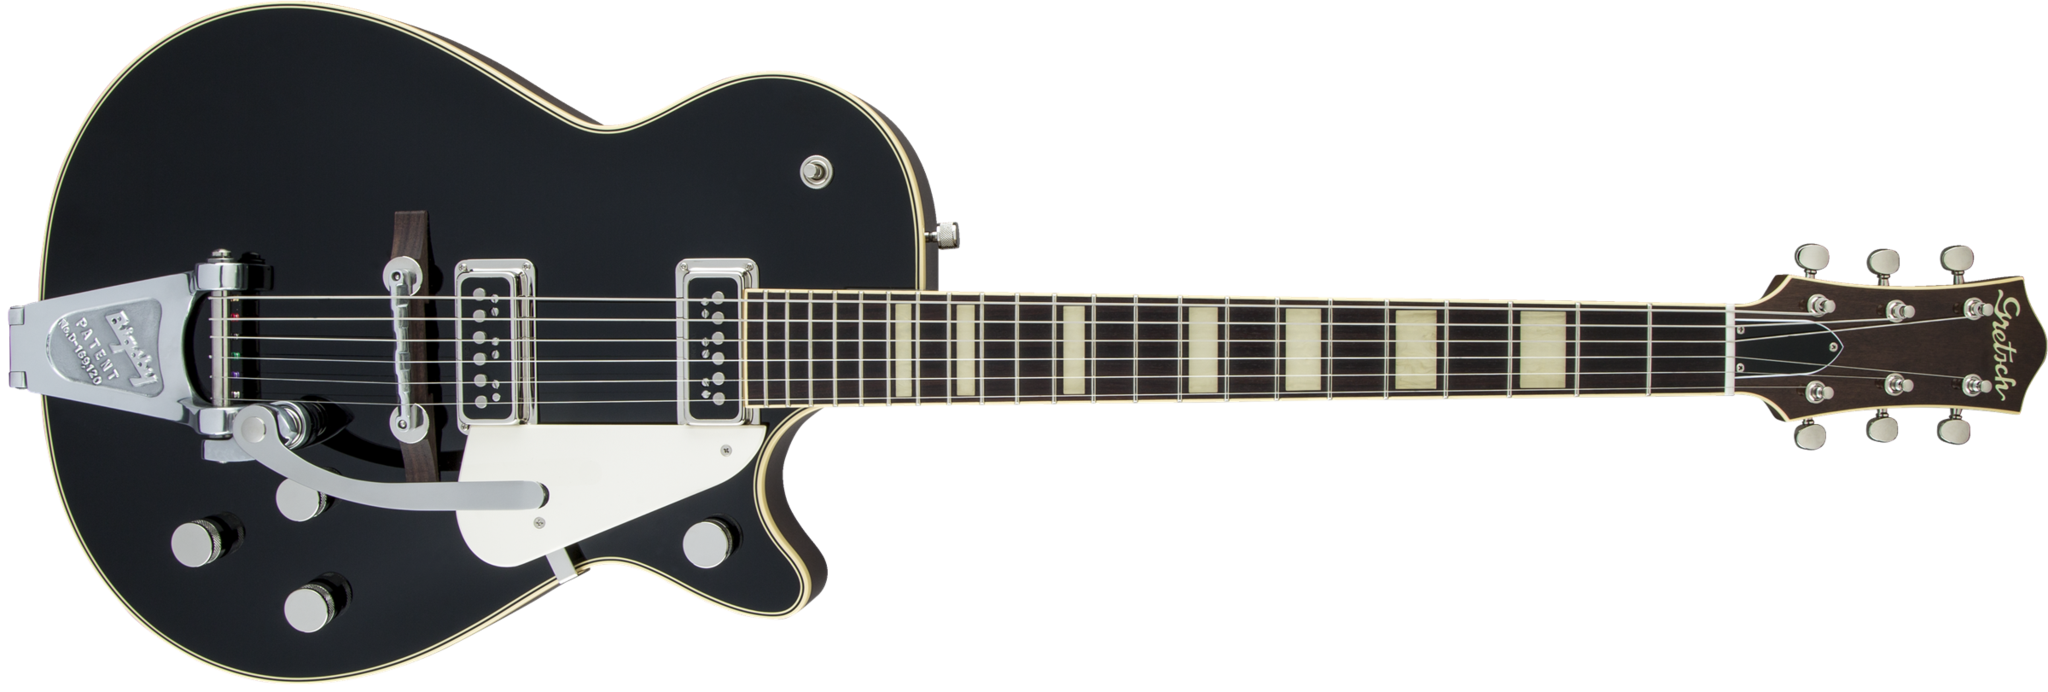 Gretsch G6128T-53 Vintage Select Duo Jet Black with Case - L.A. Music - Canada's Favourite Music Store!